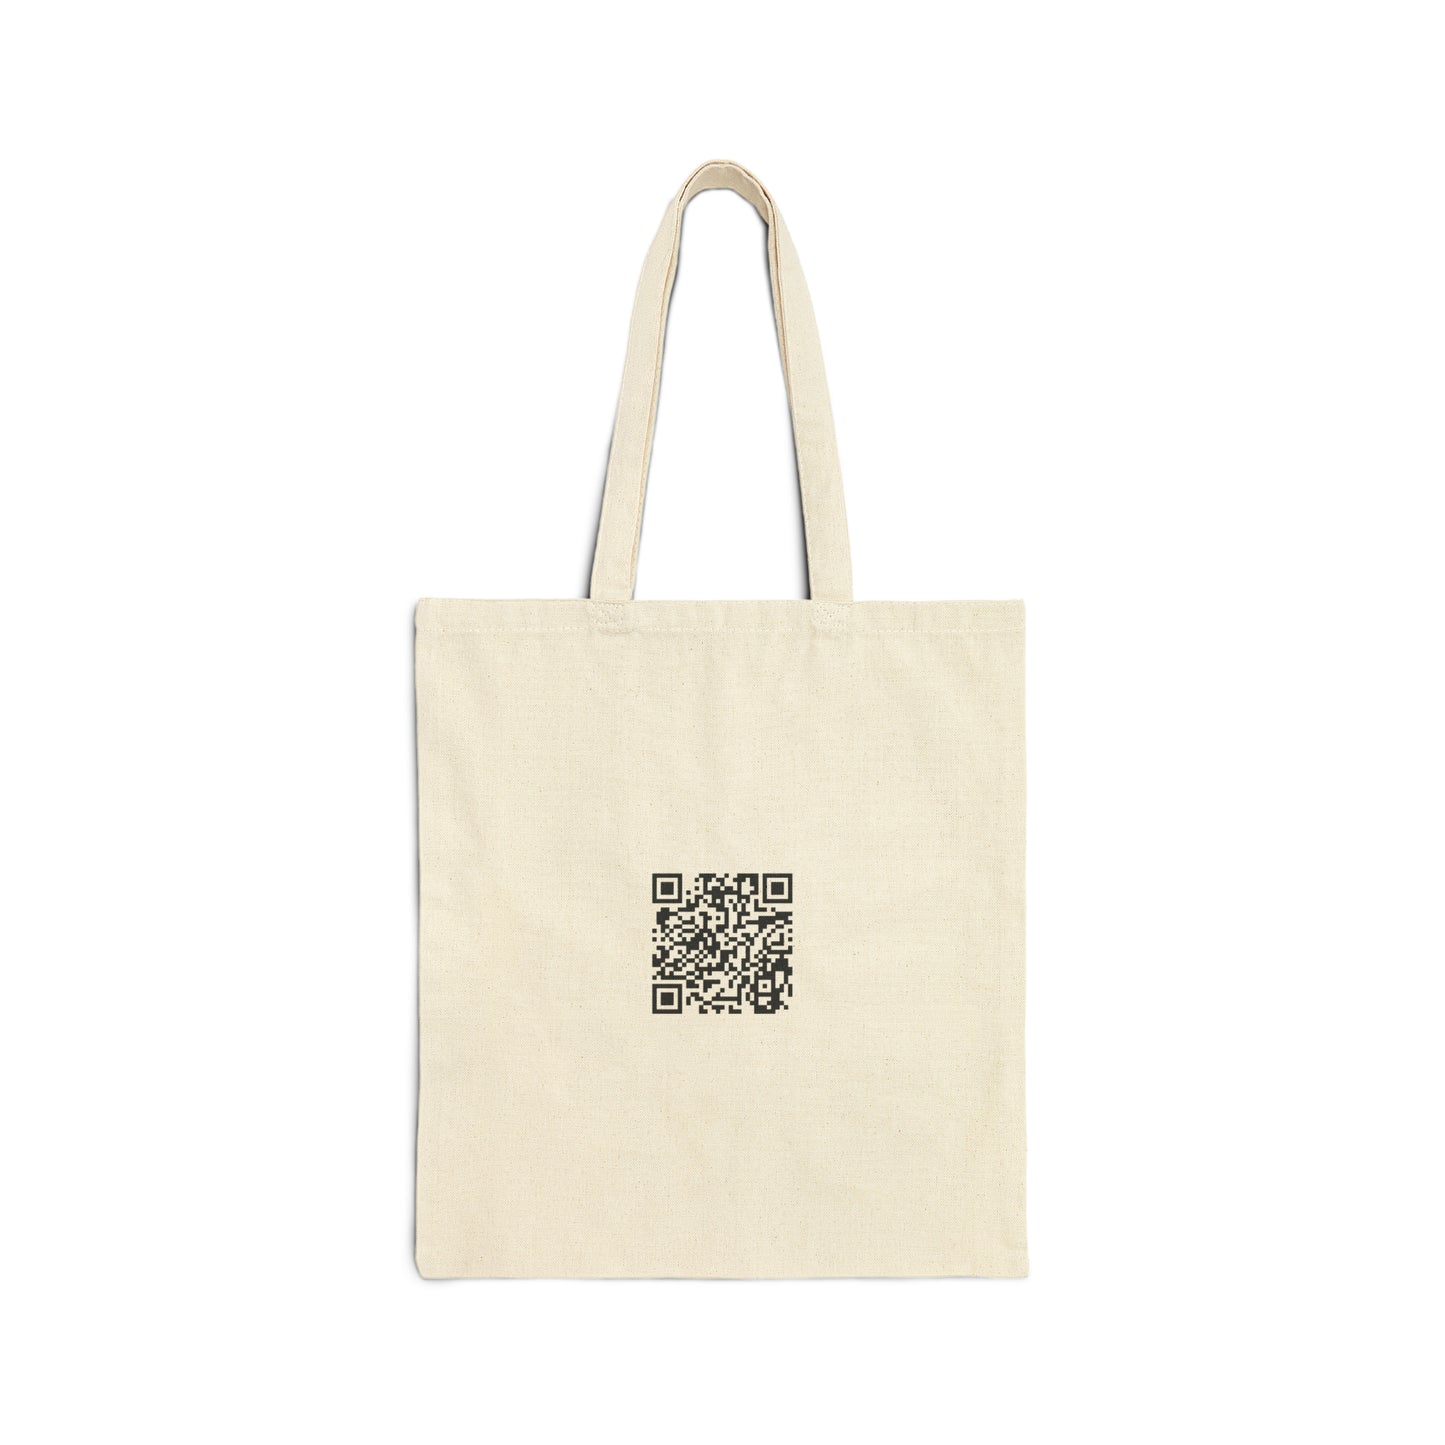 The Keepers - Cotton Canvas Tote Bag